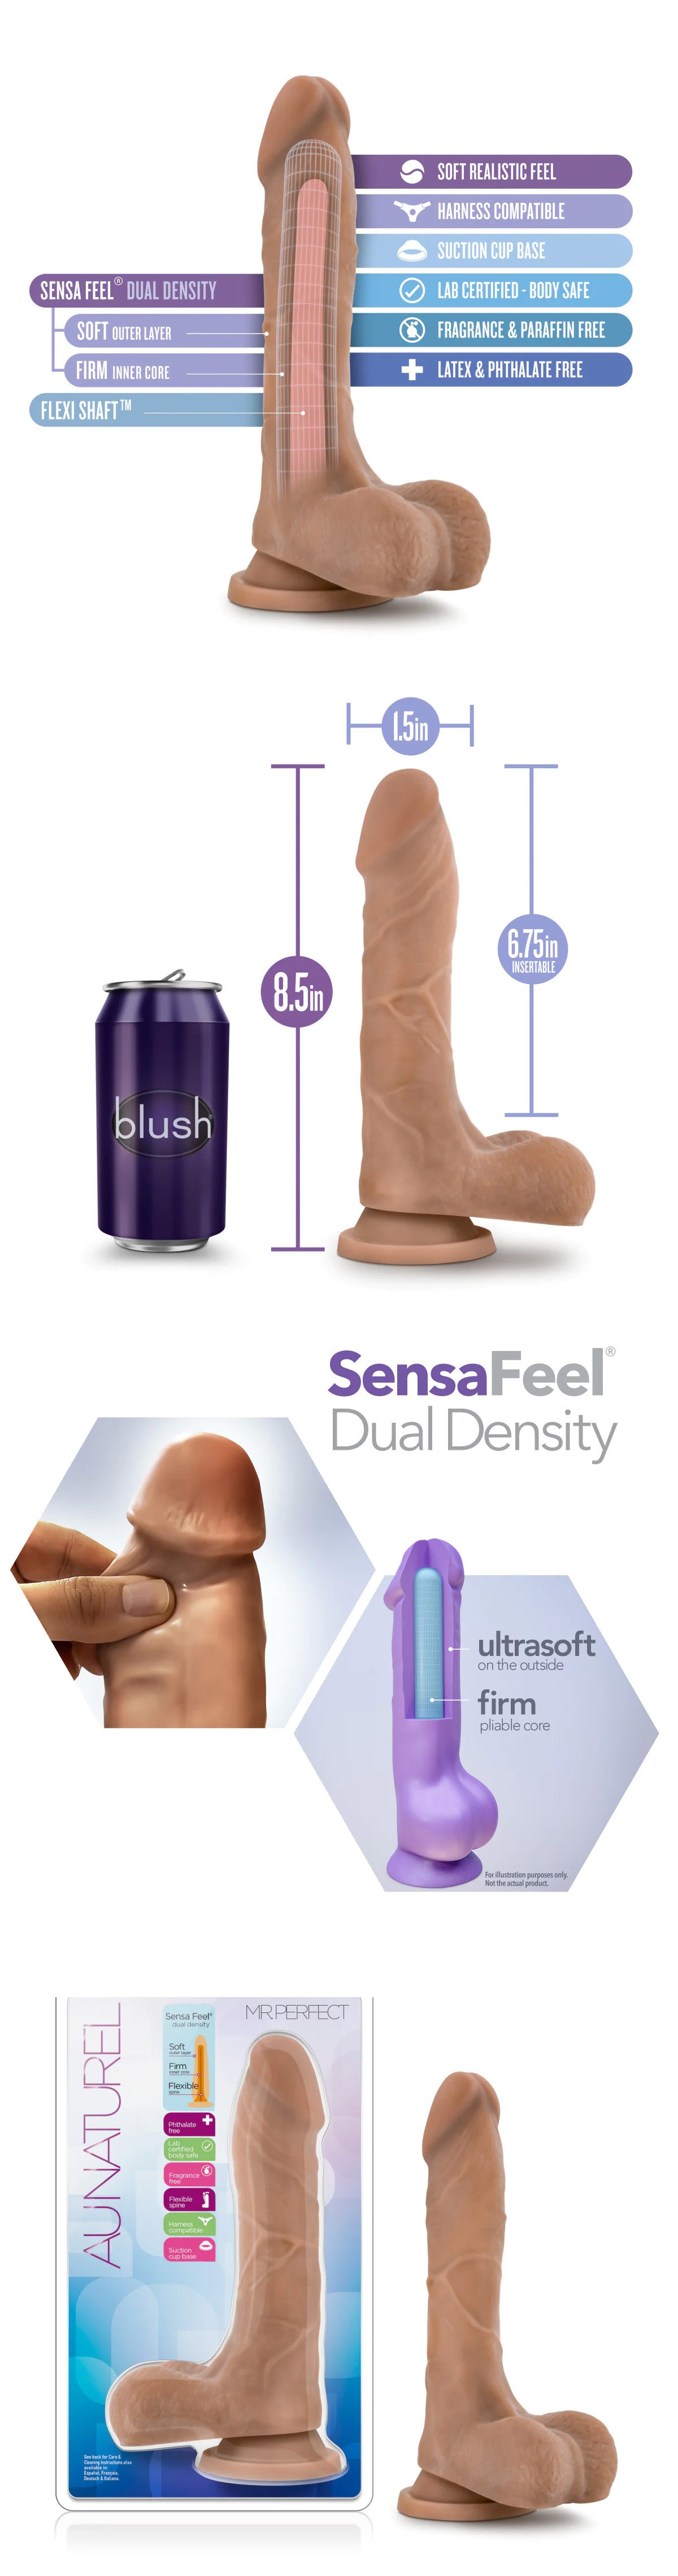 Blush Coverboy The Mailman Realistic dildo 8.5 Inch with Balls & Suction Cup